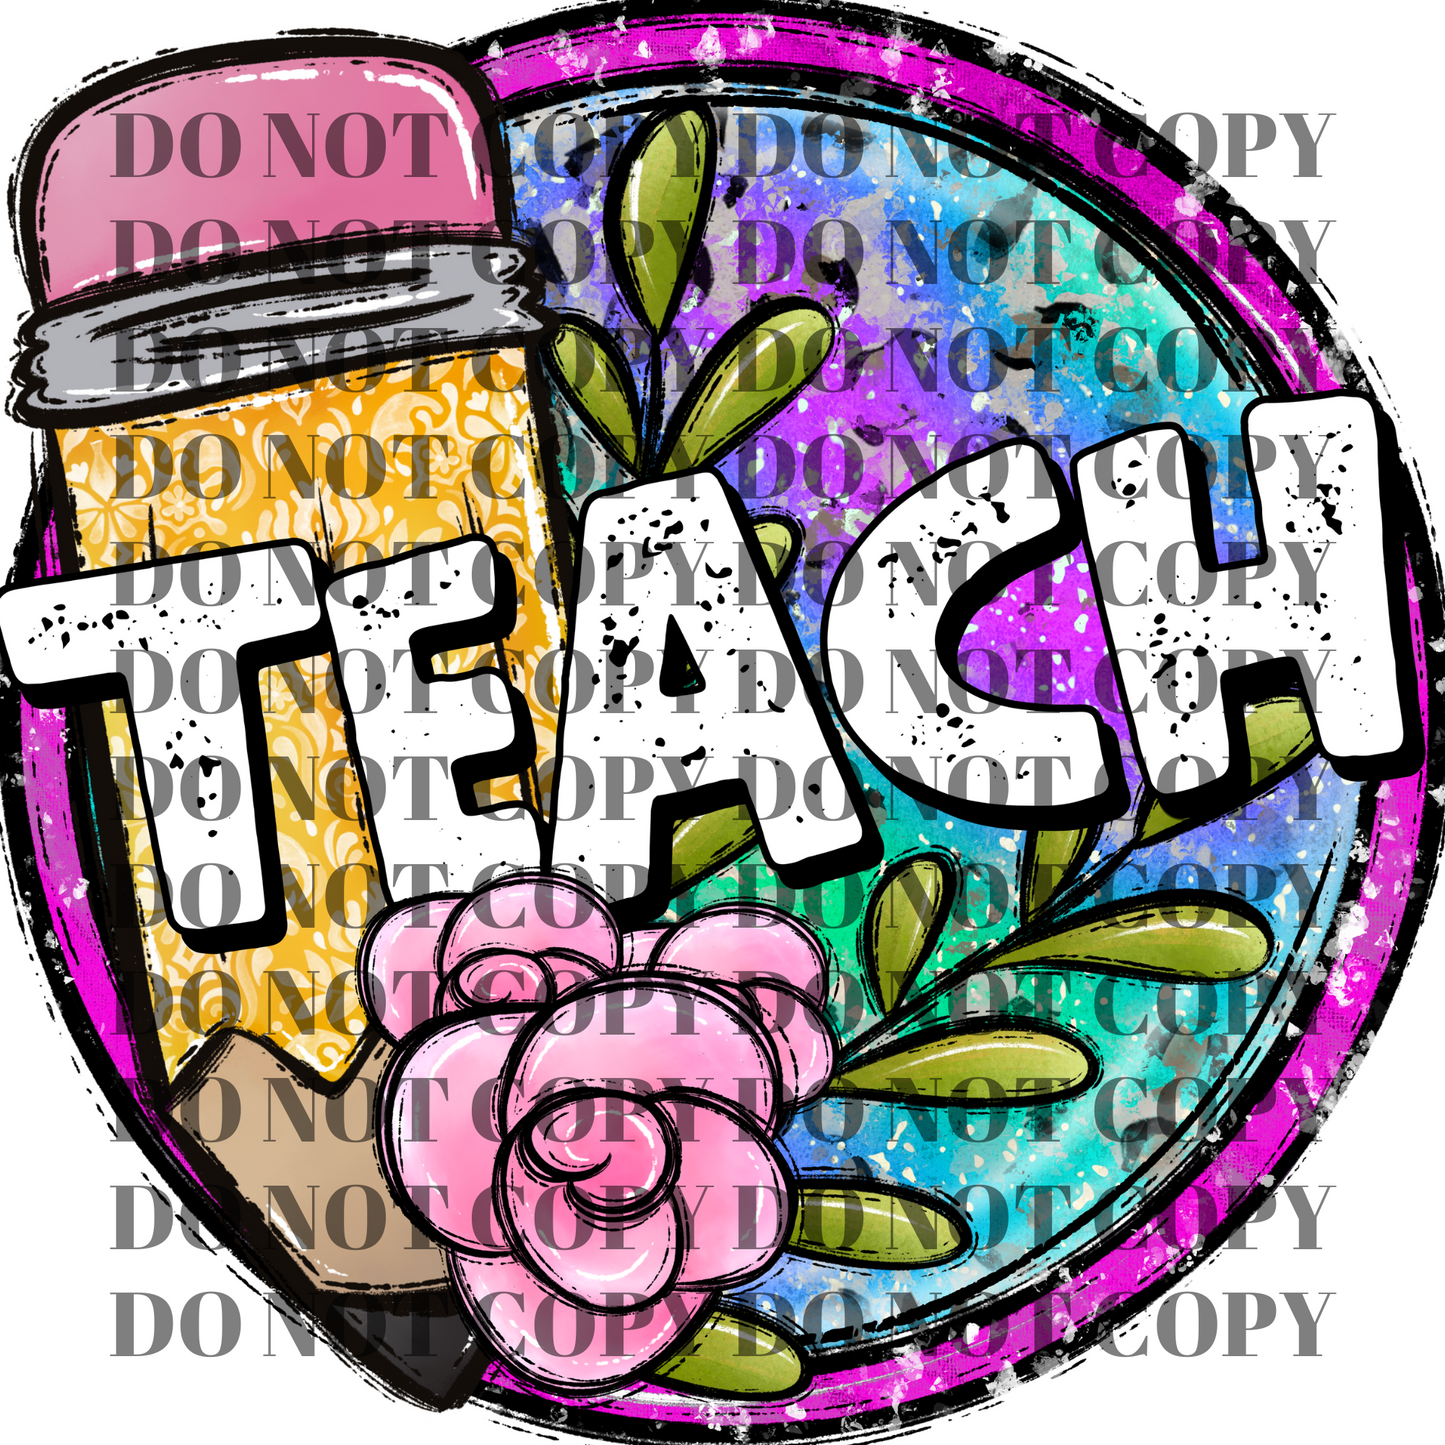 Teacher Mini Collab with RevelYOU & C's Sweet Designs - PNG Downloads